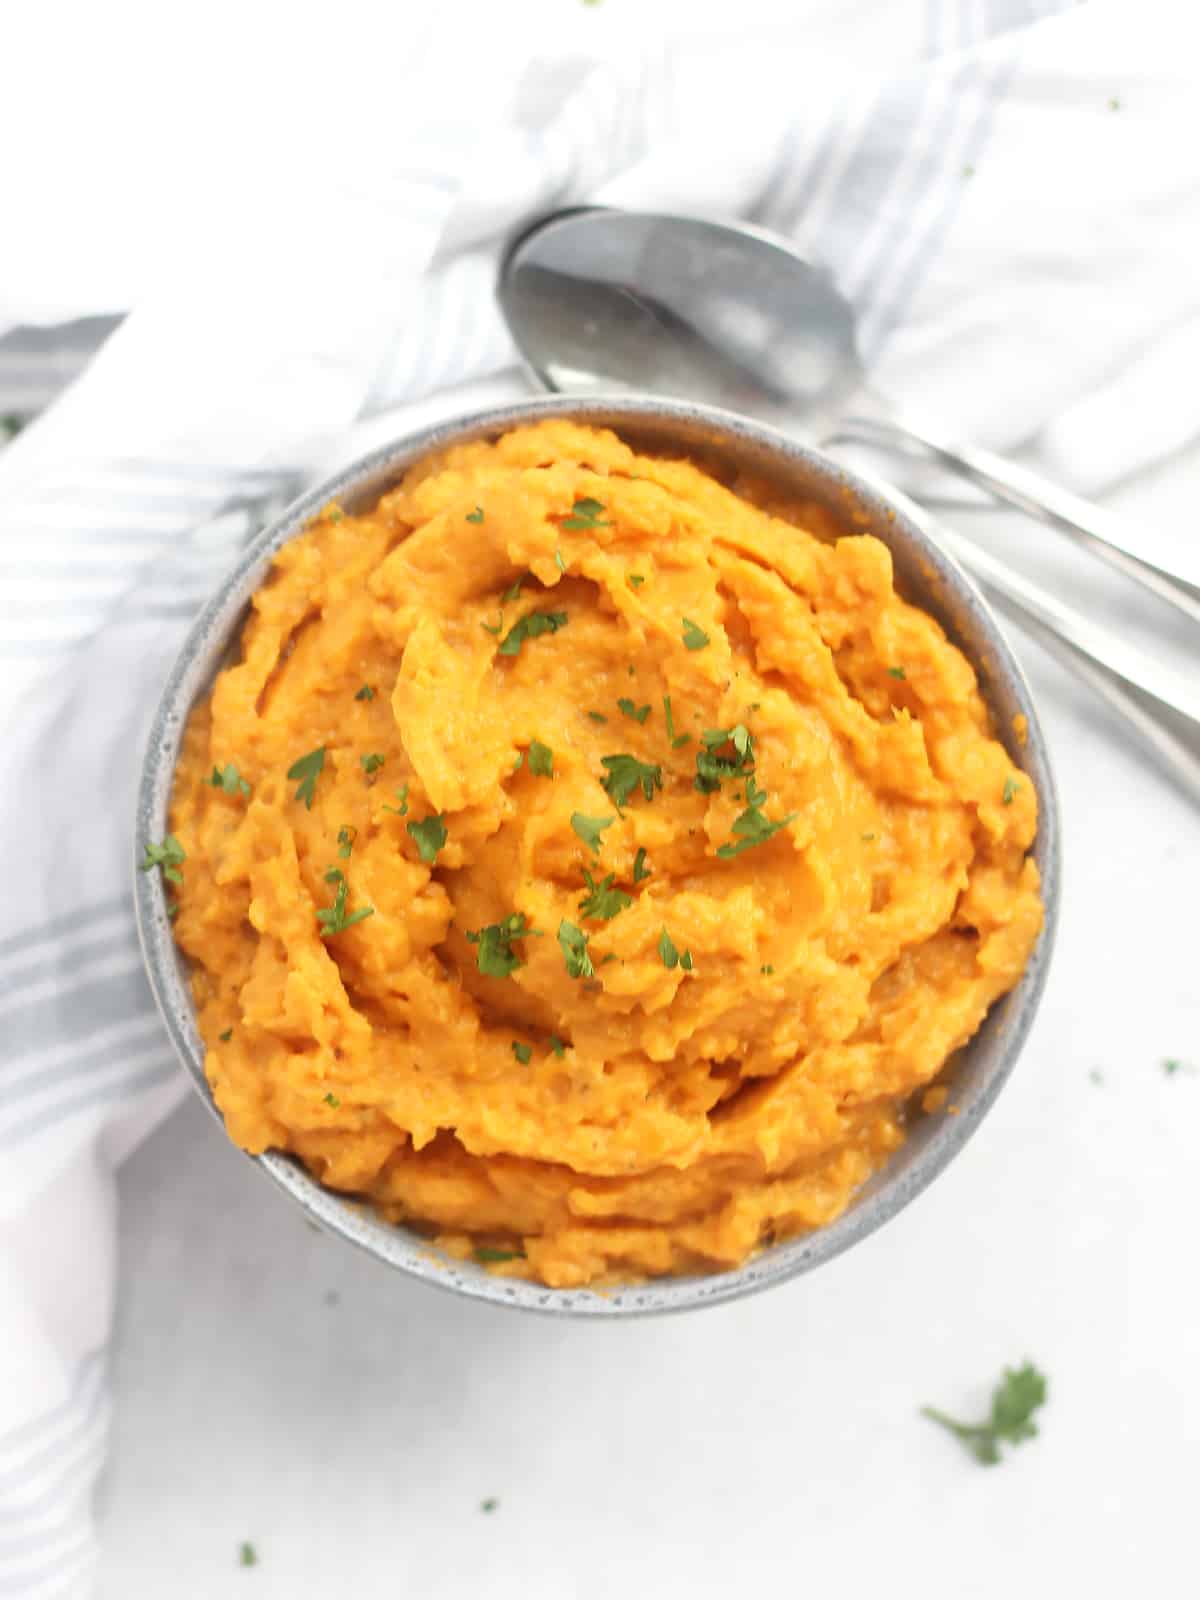 Overhead shot of a bowl of whipped sweet potatoes with two spoons.